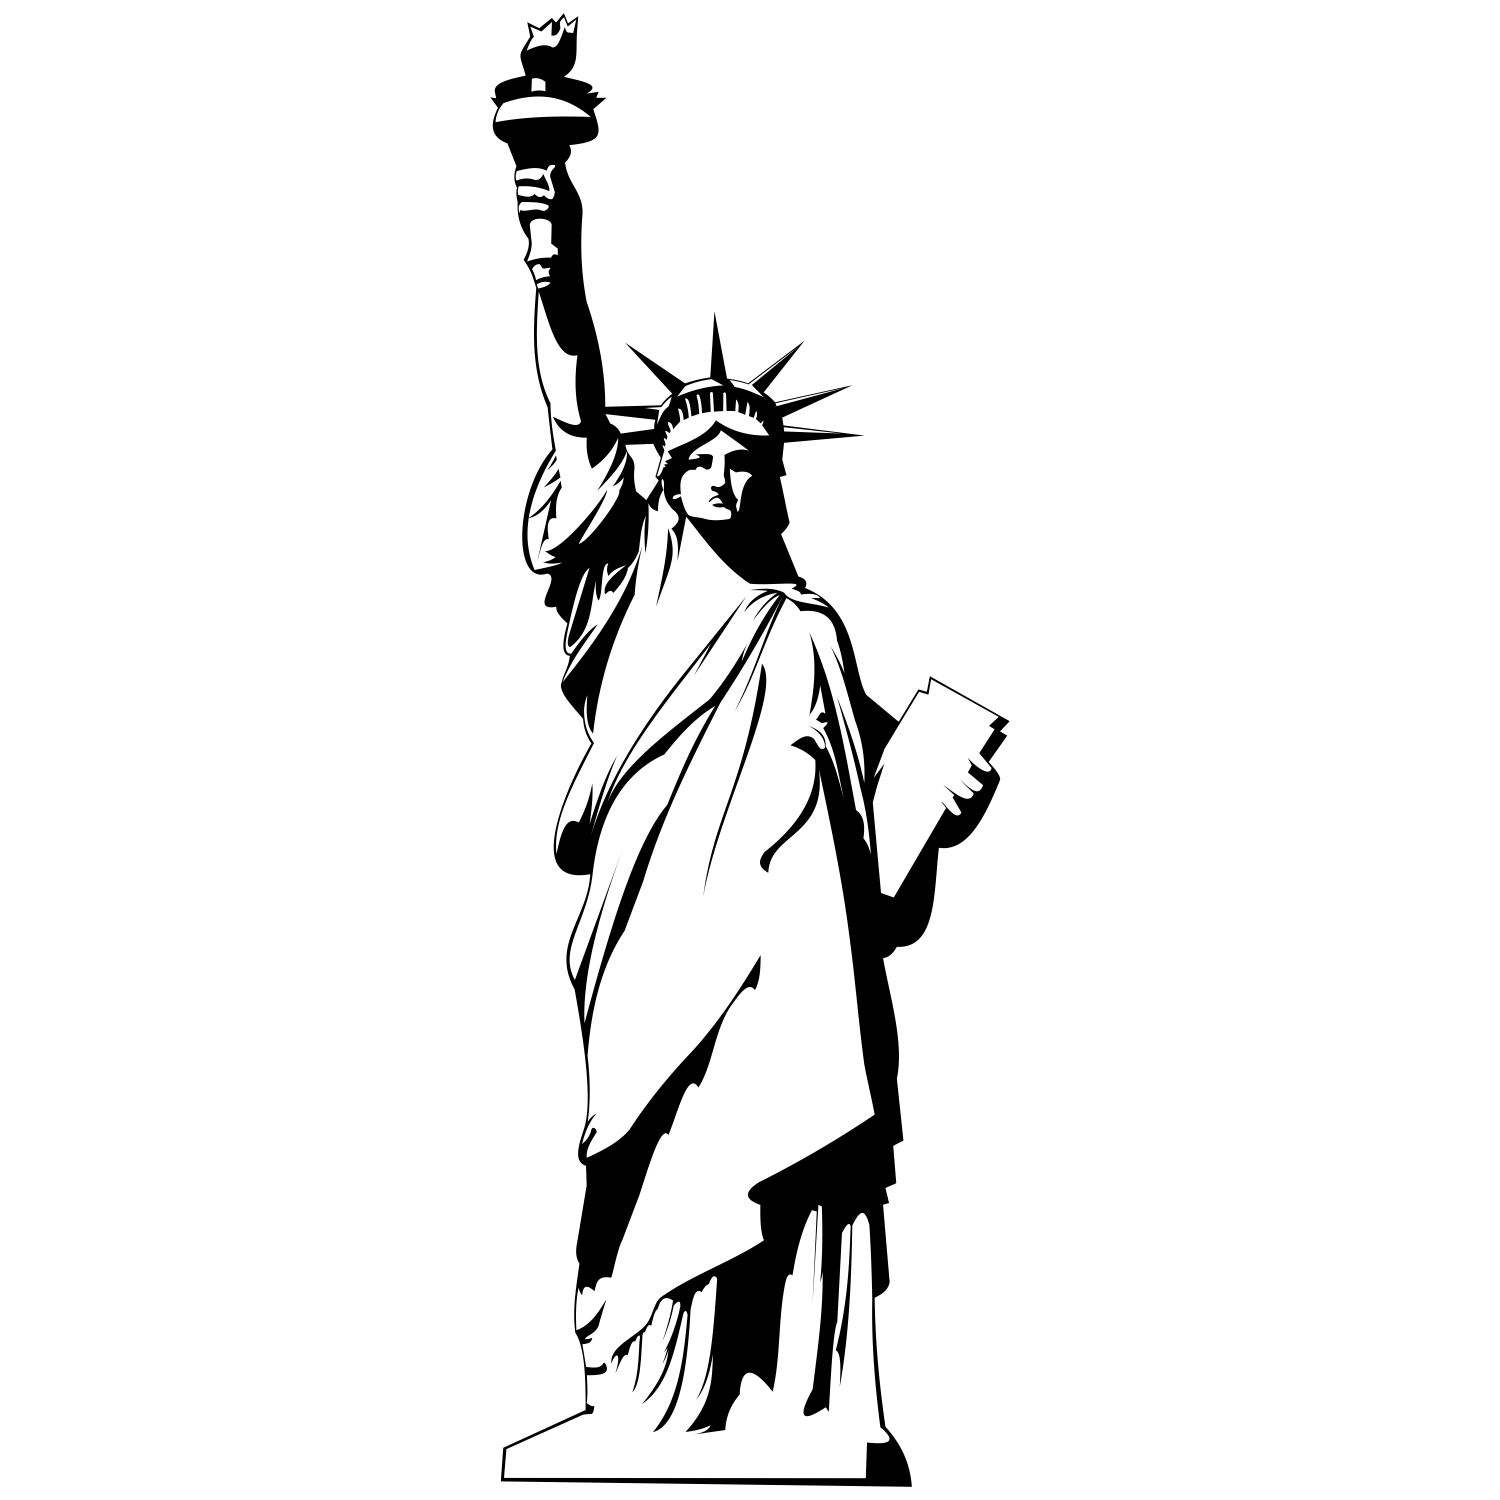 Clipart statue of liberty silhouette